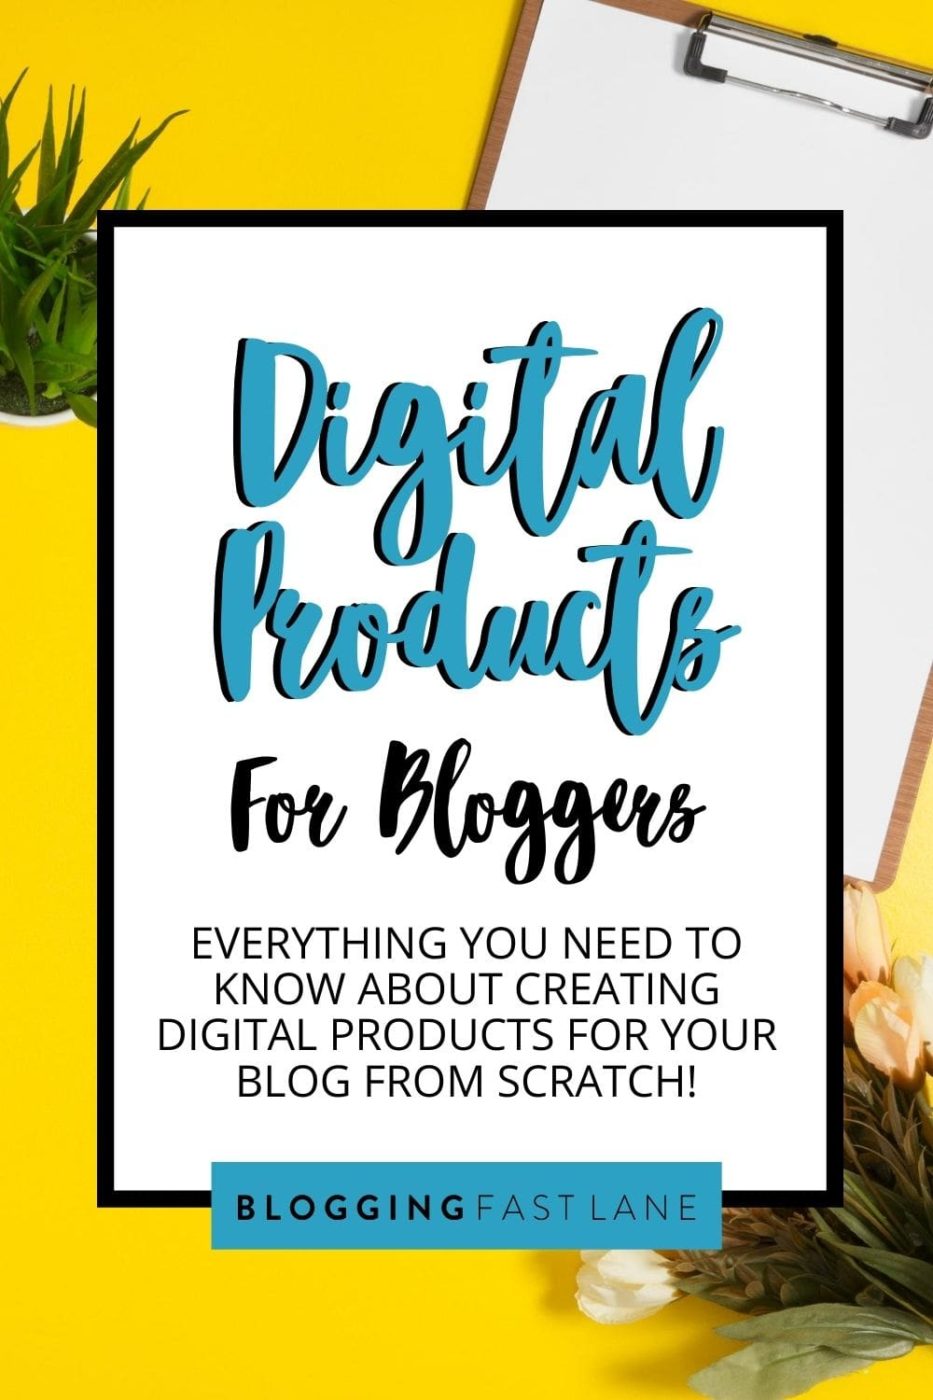 Digital Products | Are you a blogger wondering how to create digital products? Check out our complete guide to creating digital products + heaps of product examples!